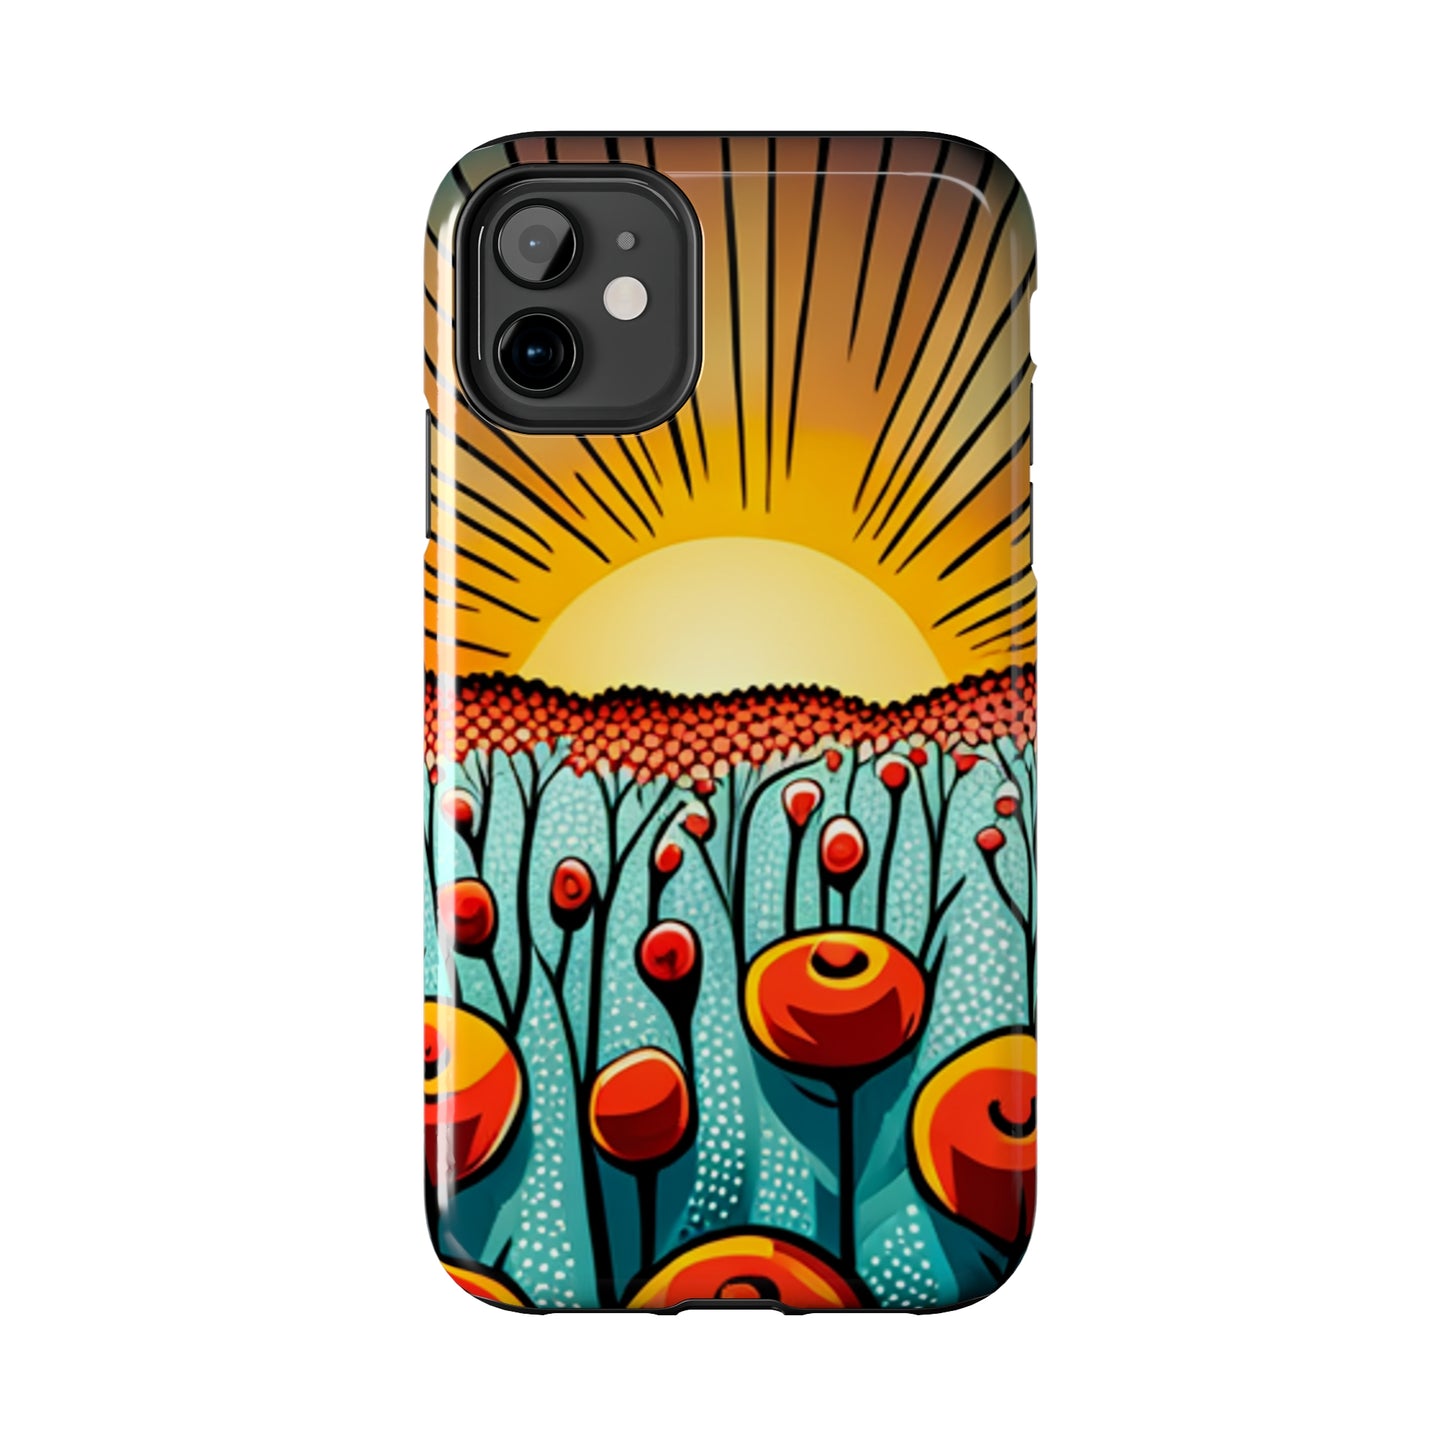 All iPhone Models: Tough Phone Cases